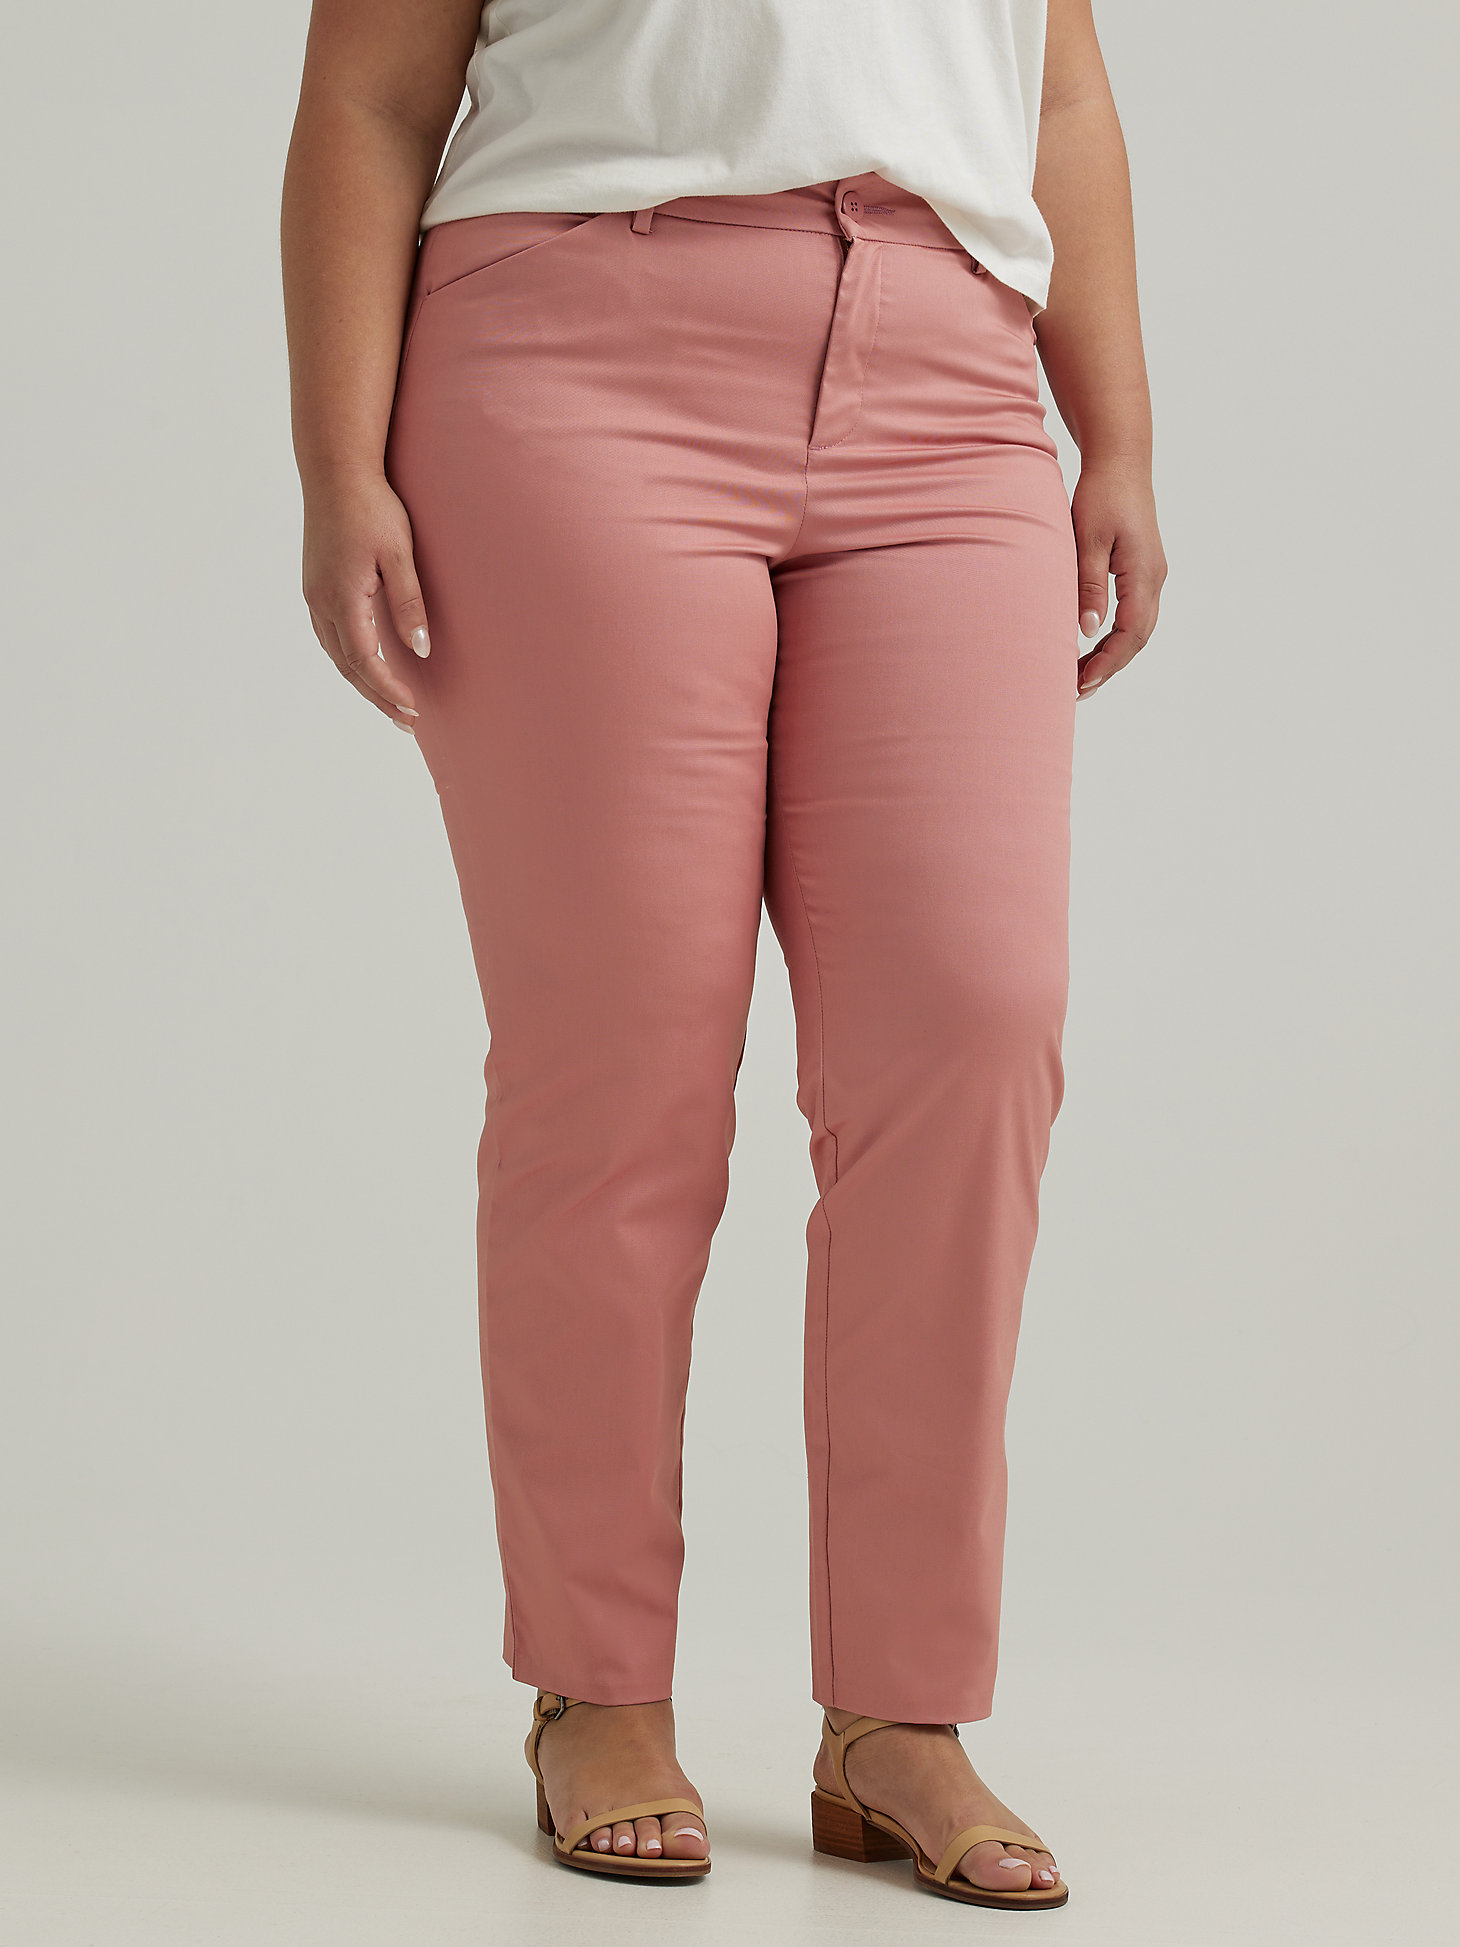 Women's Wrinkle Free Relaxed Fit Straight Leg Pant (Plus) in Mallory Pink main view